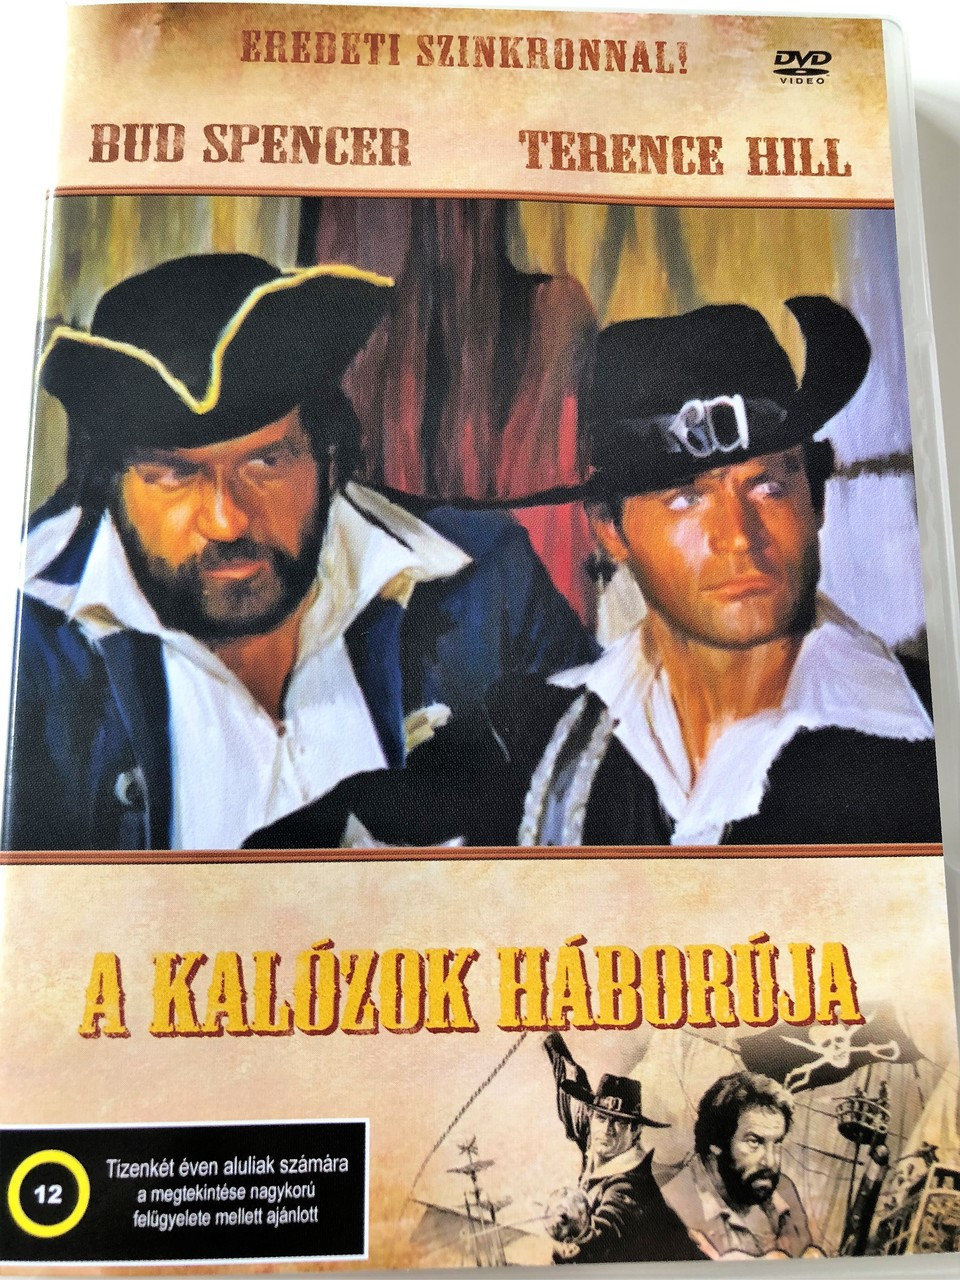 Kalózok háborúja DVD 1971 (Il corsaro nero) / Blackie the Pirate / Audio:  Hungarian and Italian / Starring: Terence Hill, George Martin, Silvia Monti  and Bud Spencer / Directed by: Enzo Gicca - Bible in My Language